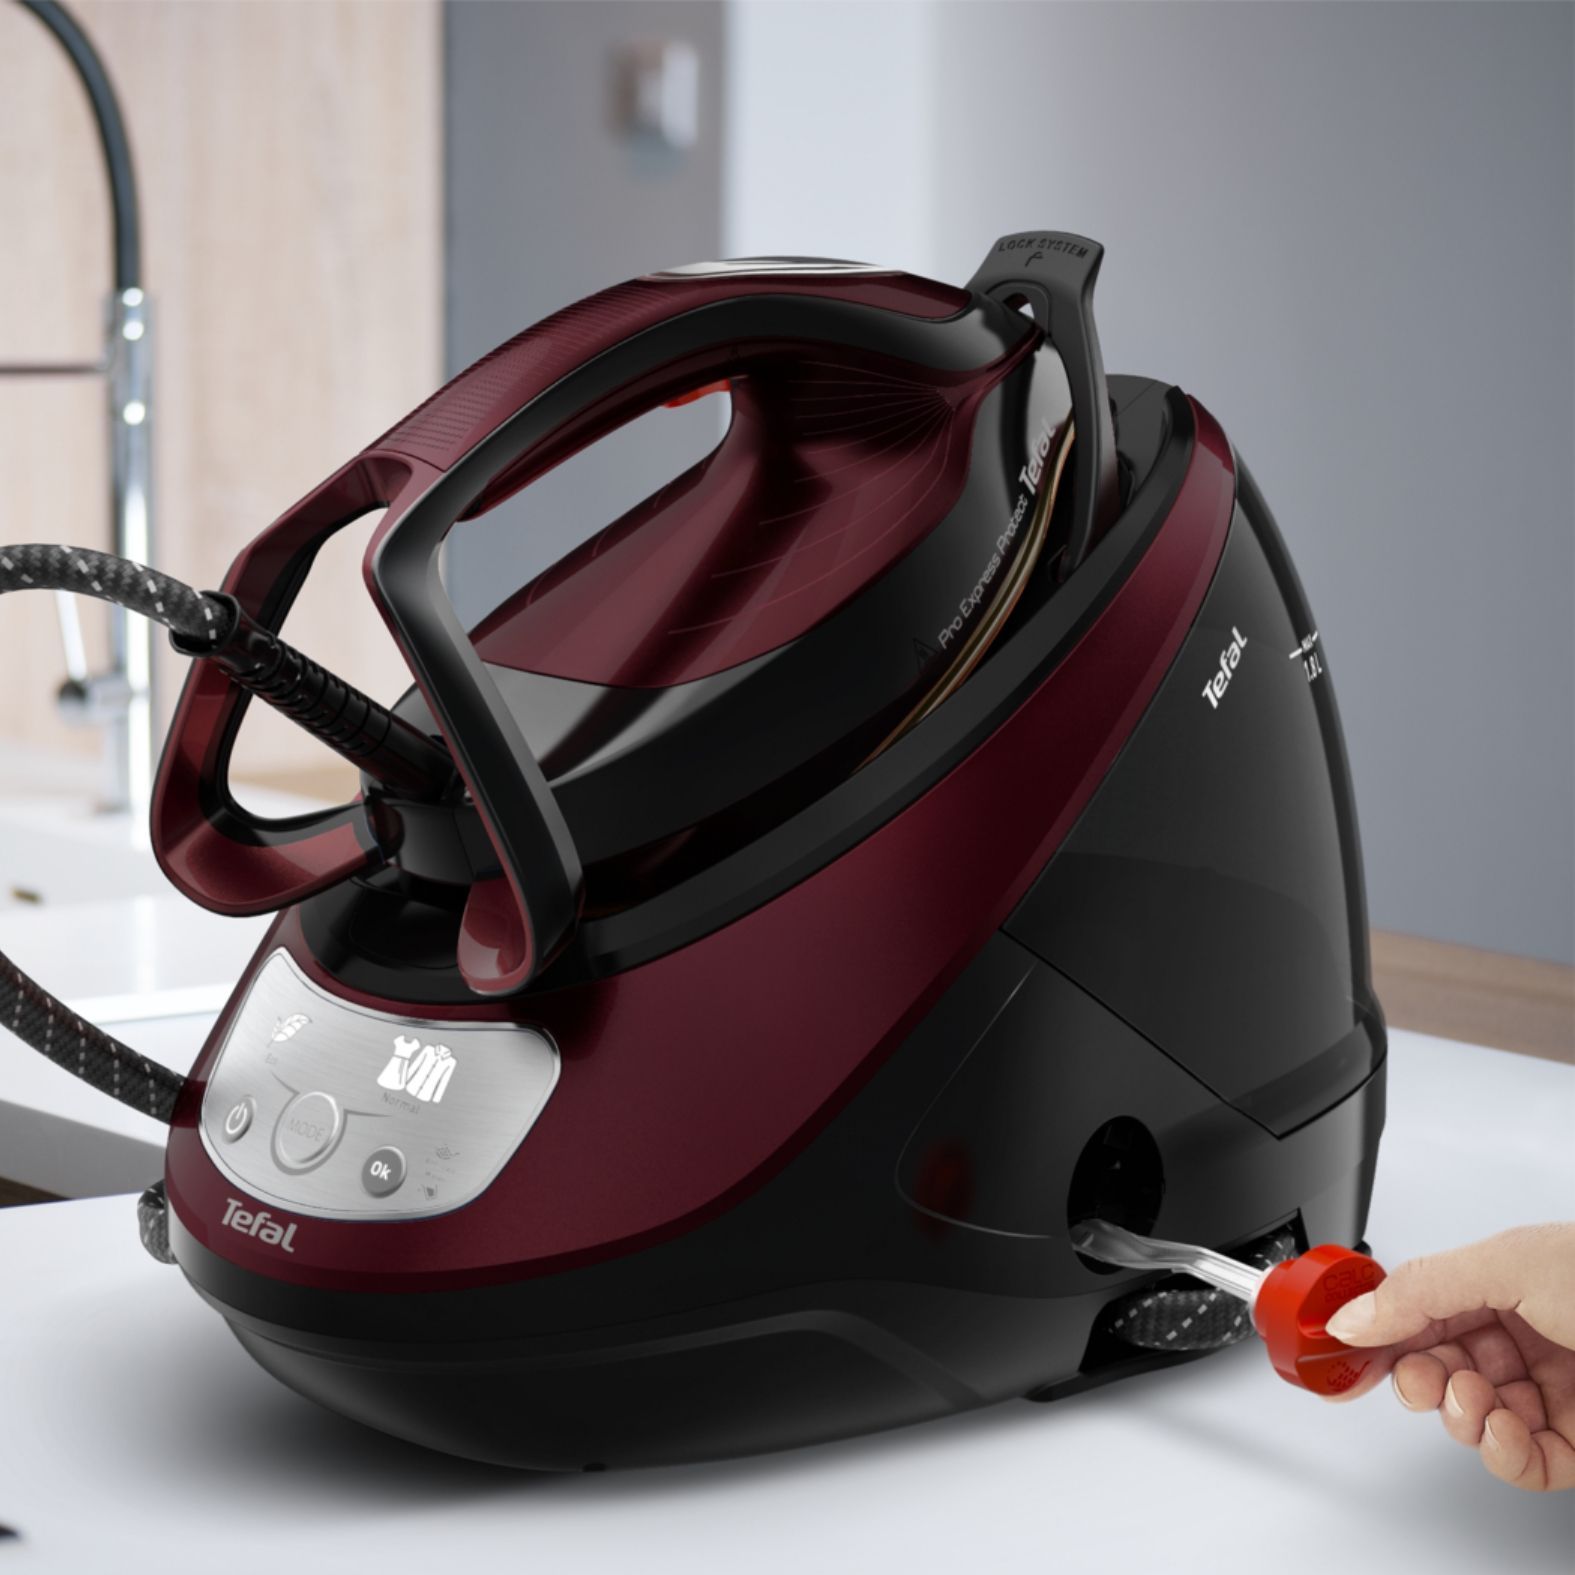 Steam generator irons review фото 87